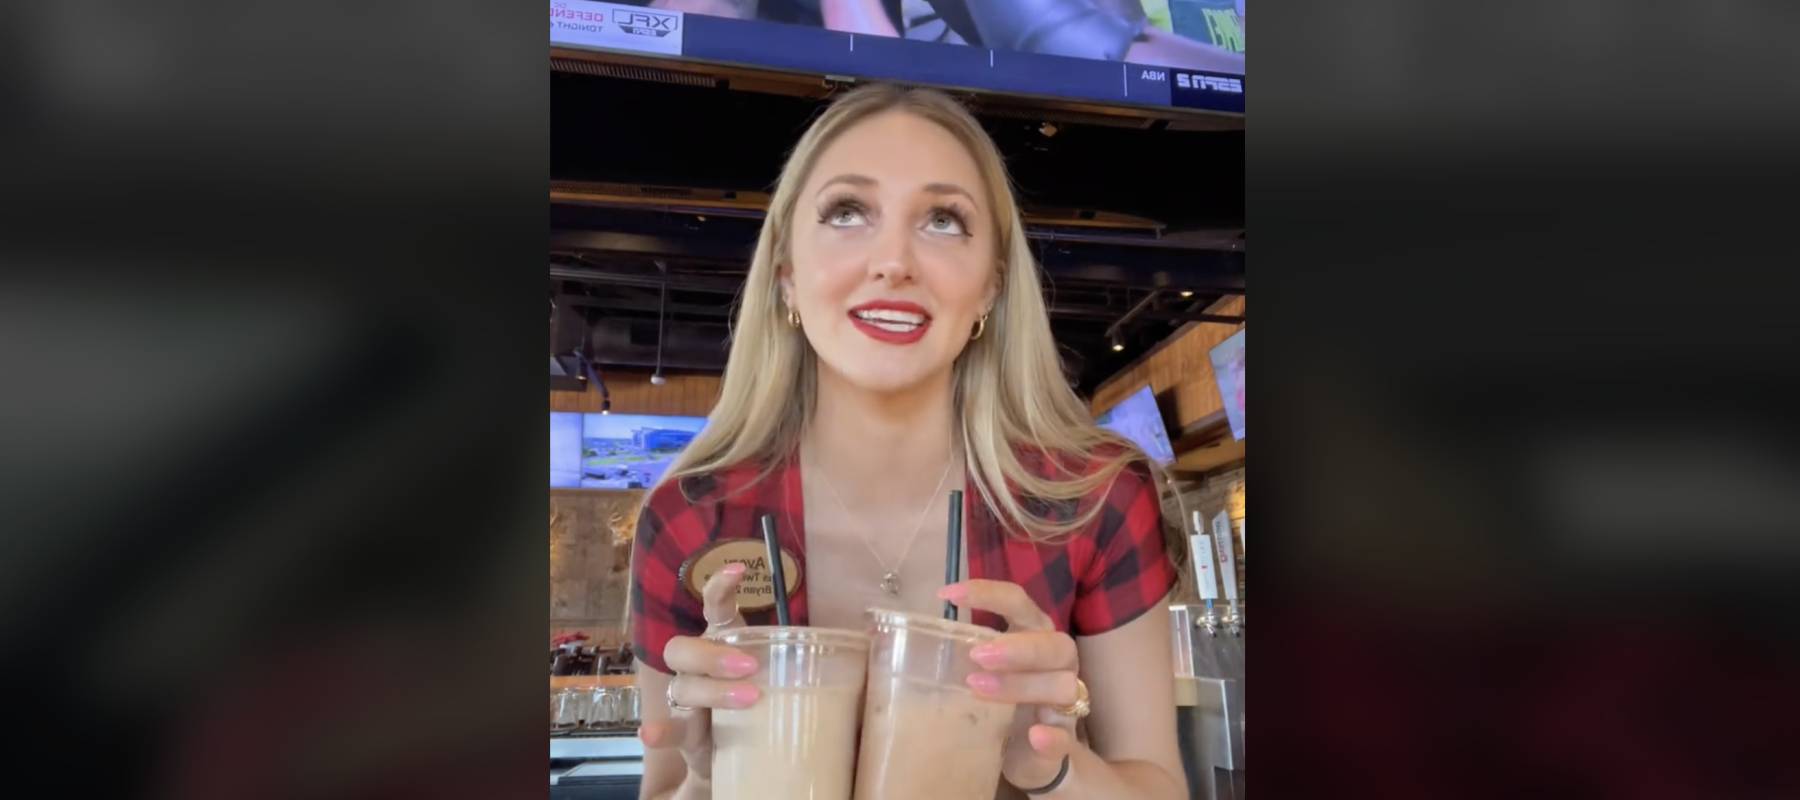 Avery Linhart at the beginning of a shift at Twin Peaks in a TikTok video.